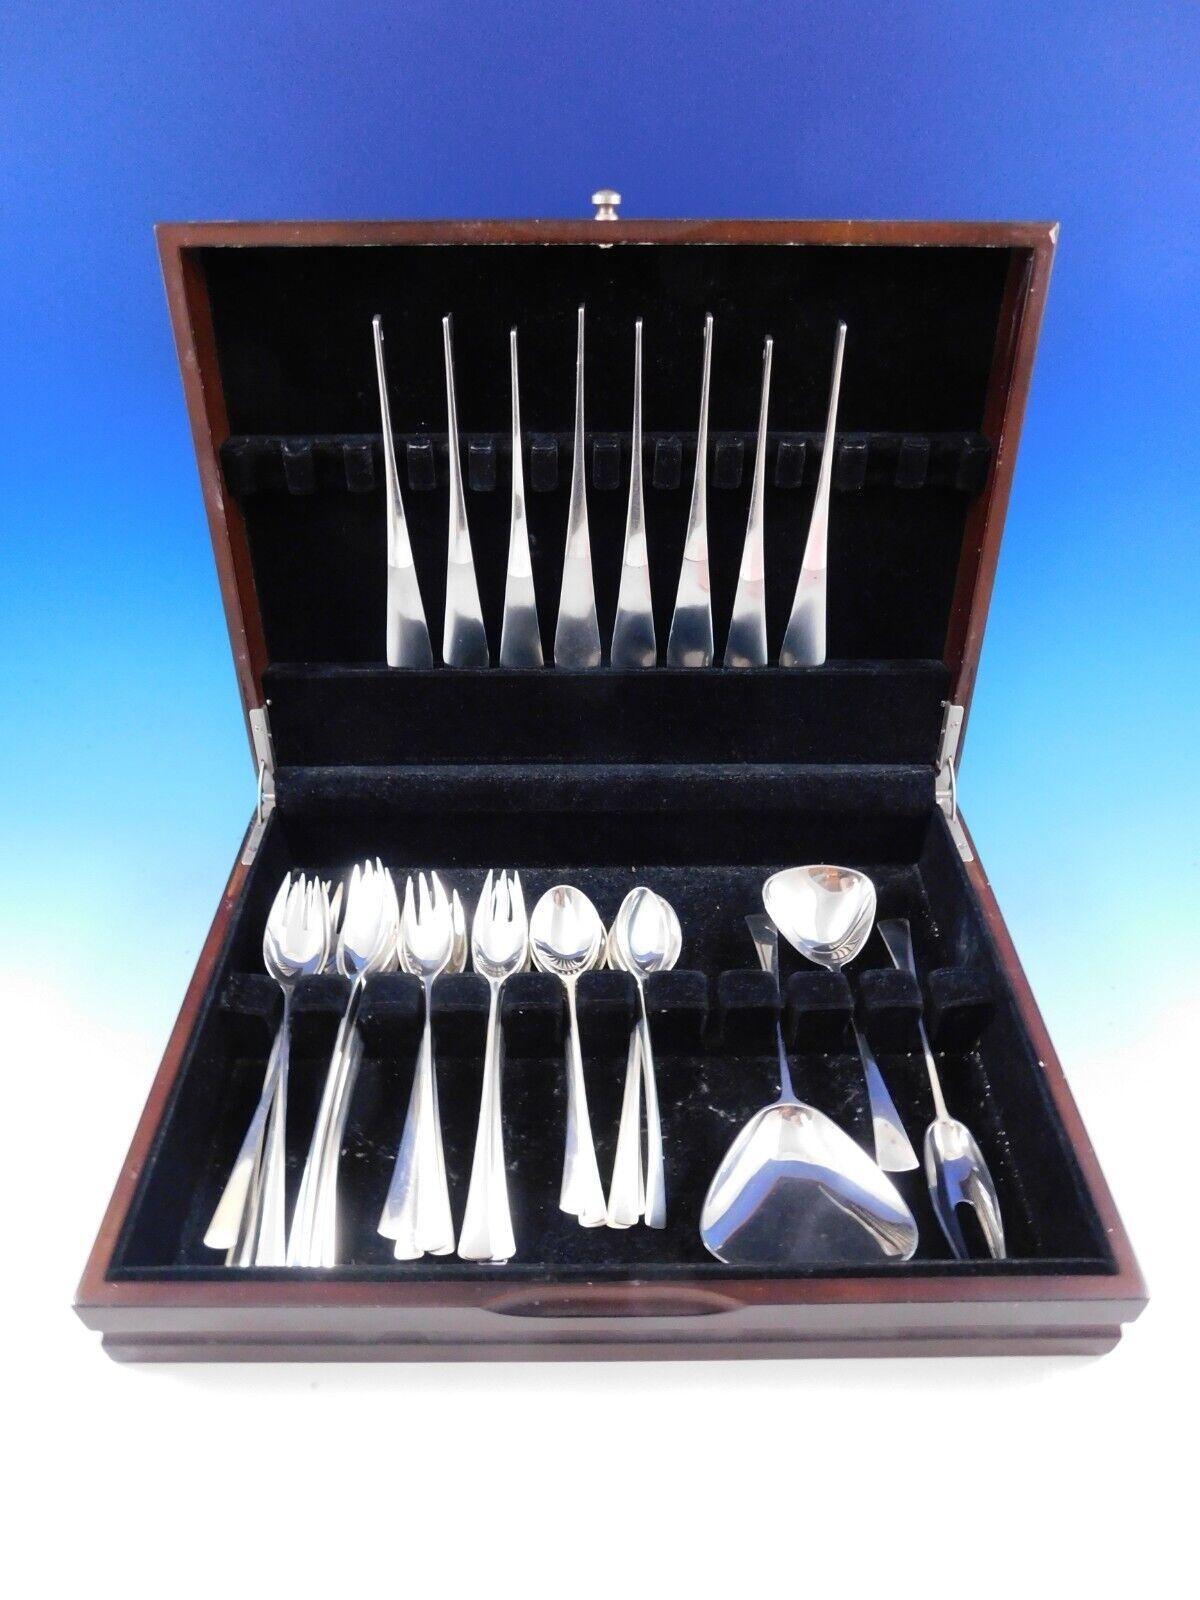 The innovative and highly desirable flatware pattern 